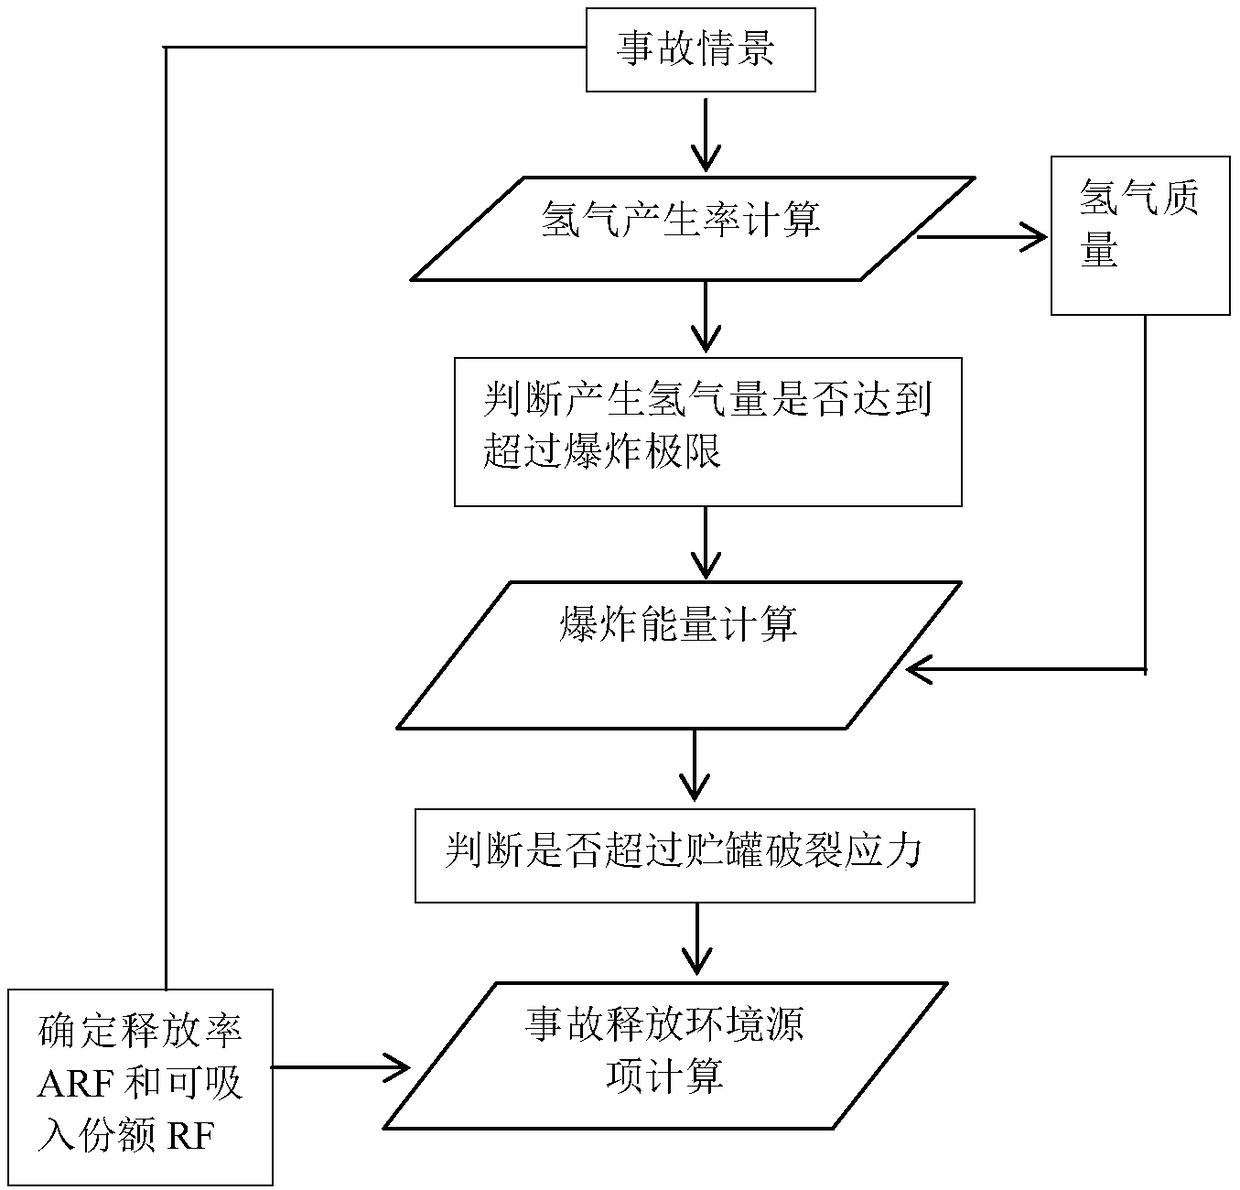 A hydrogen mixed gas explosion source item estimation method for a high-level waste liquid storage tank